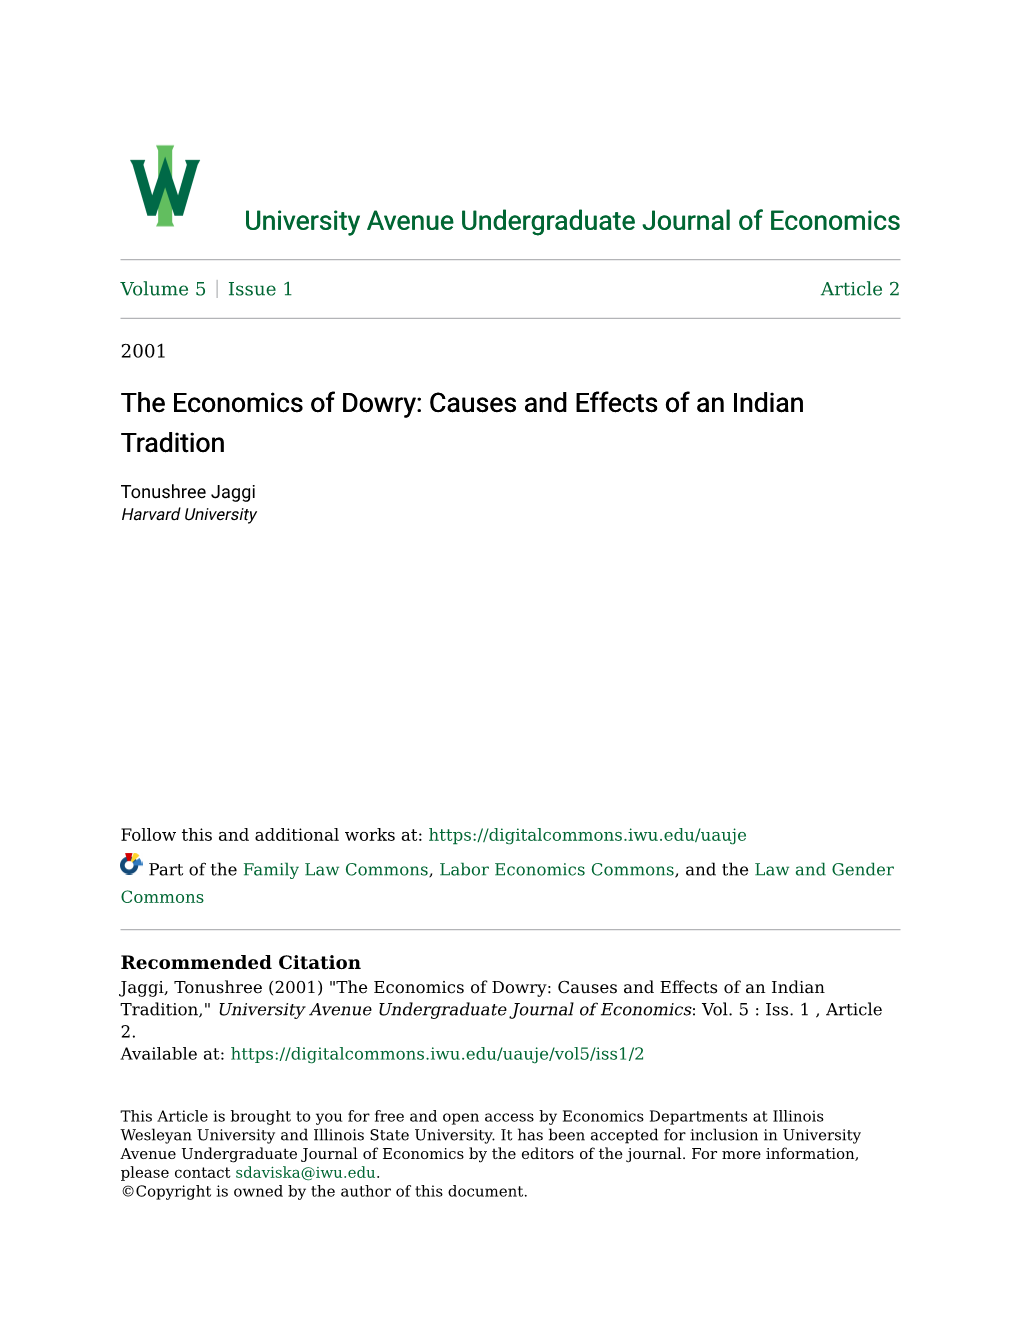 The Economics of Dowry: Causes and Effects of an Indian Tradition